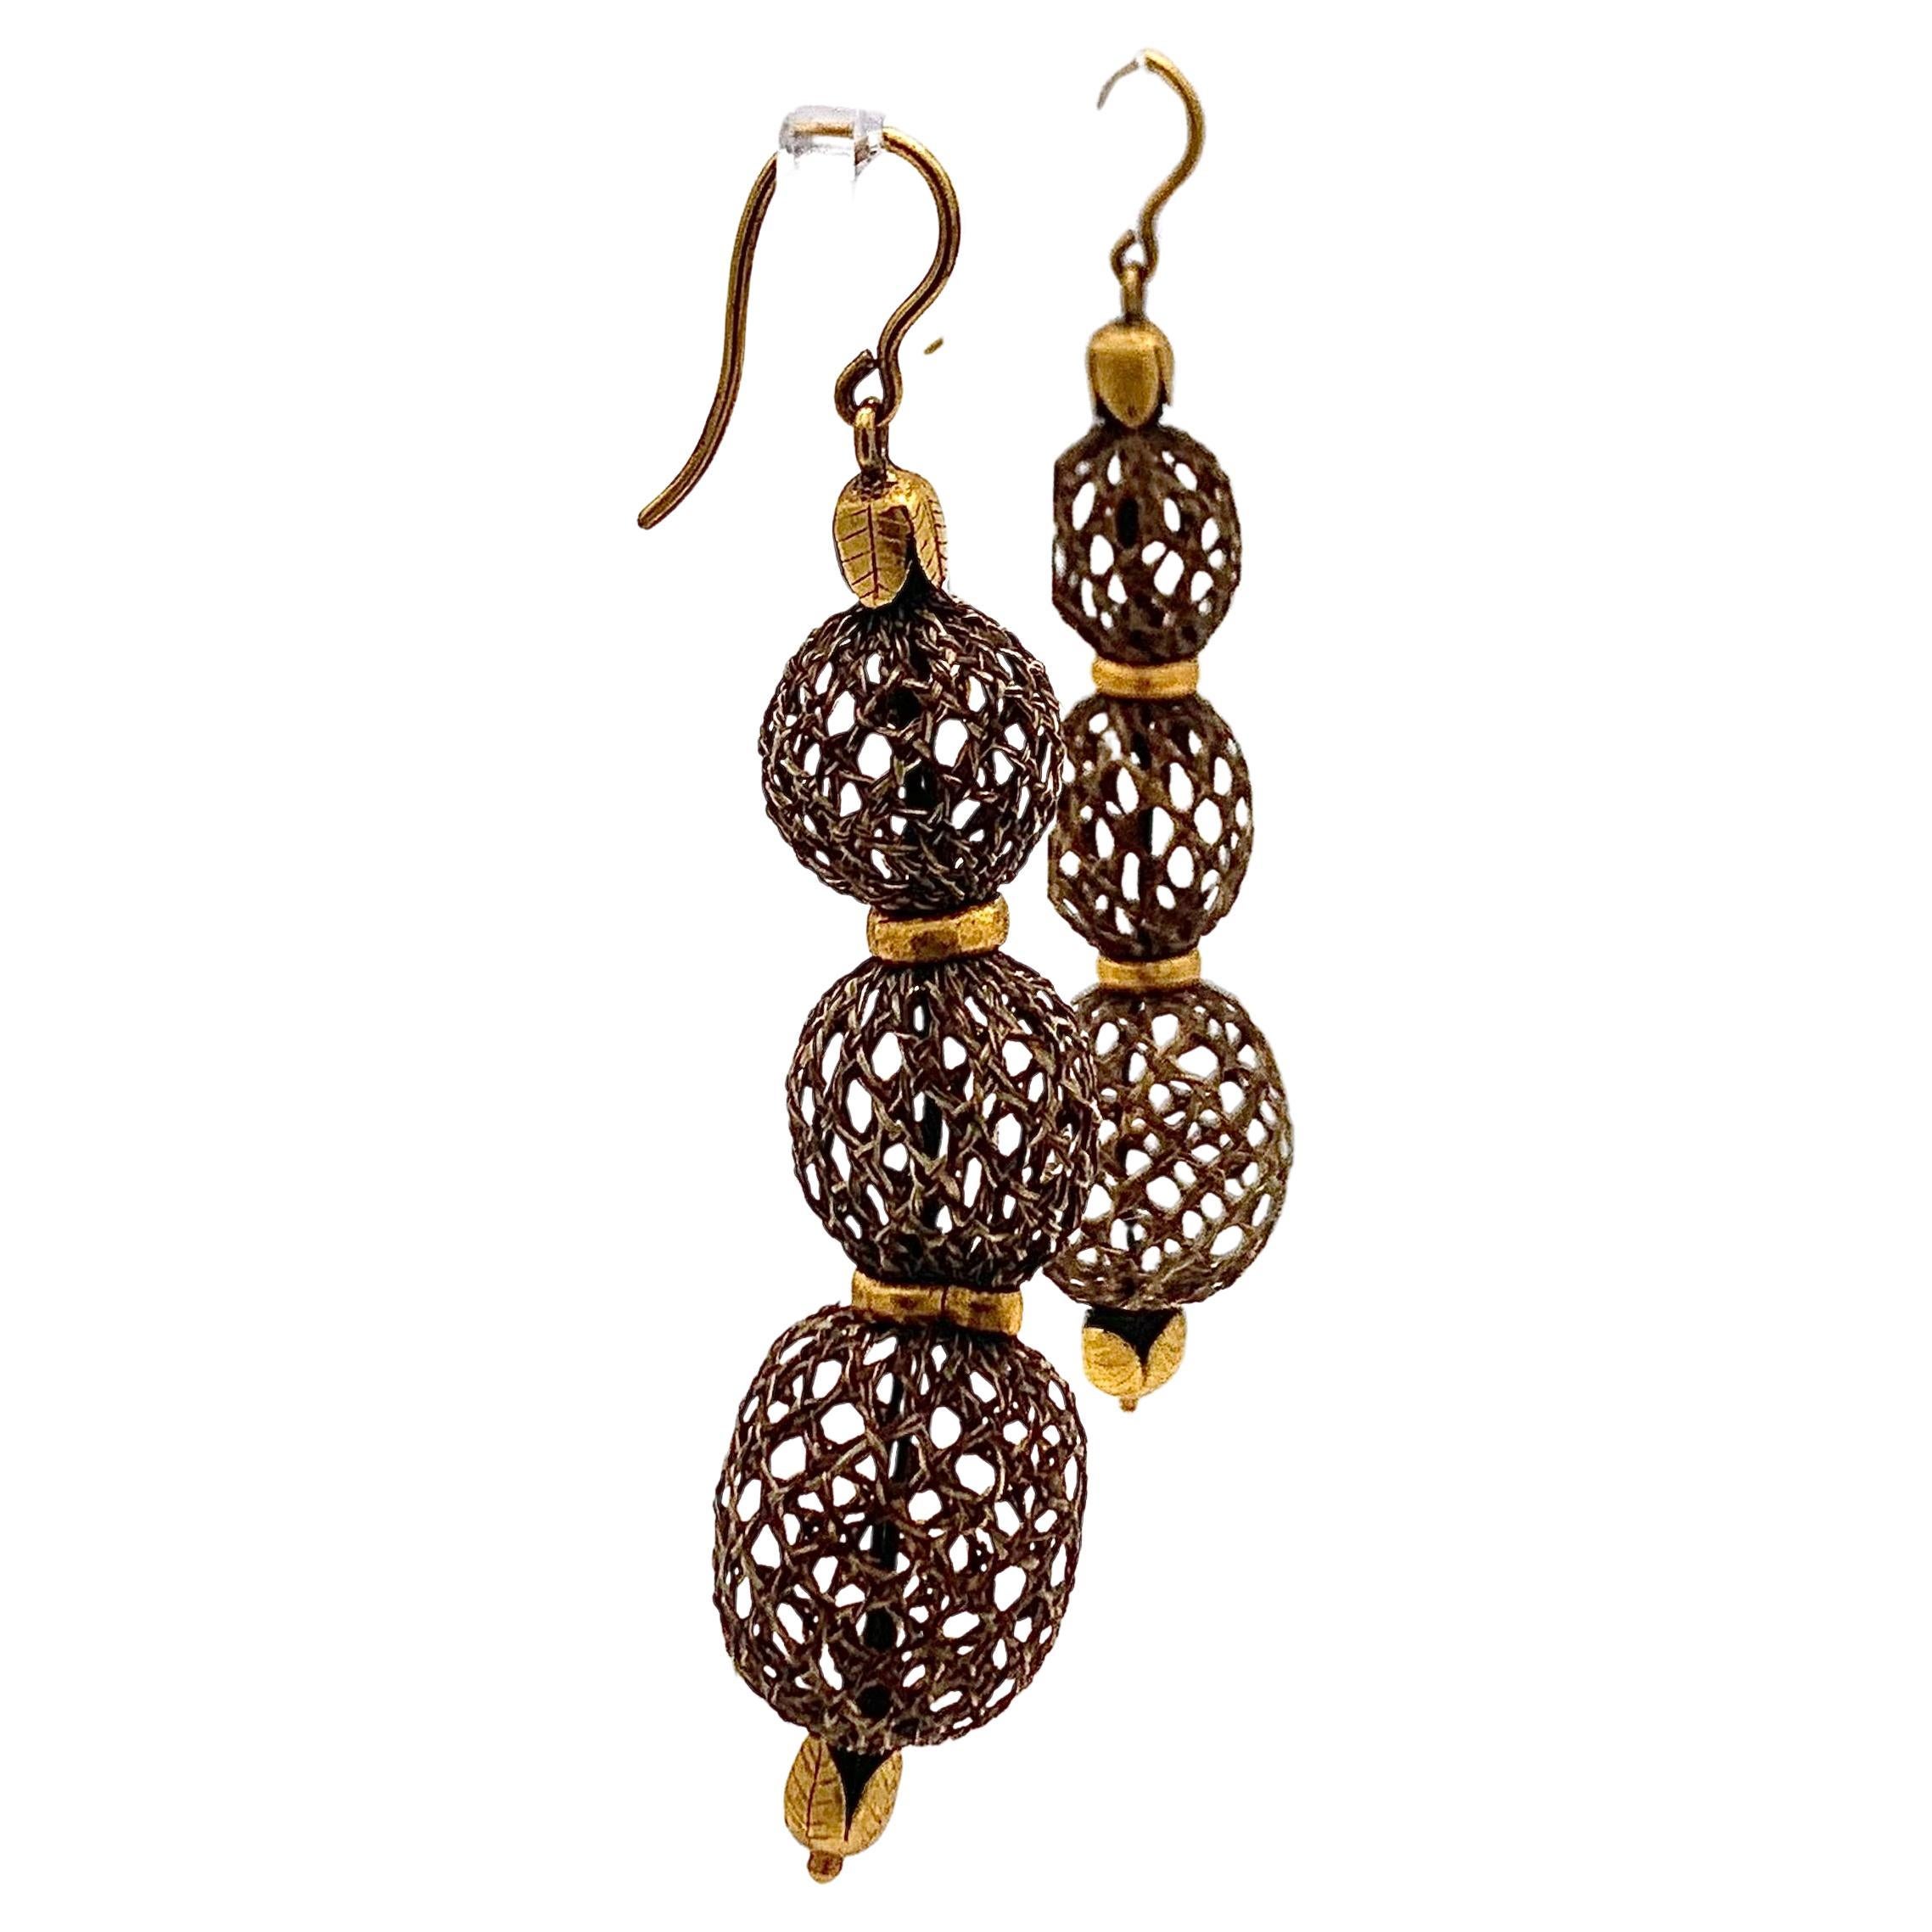 These drop earrings were handcrafted out of hair and 14 karat gold in 1820 ca.
Each earring consists of three spheres. The ends of the woven  hair terminate in gold fittings designed as leaves. The spheres are embellished with gold rings.  